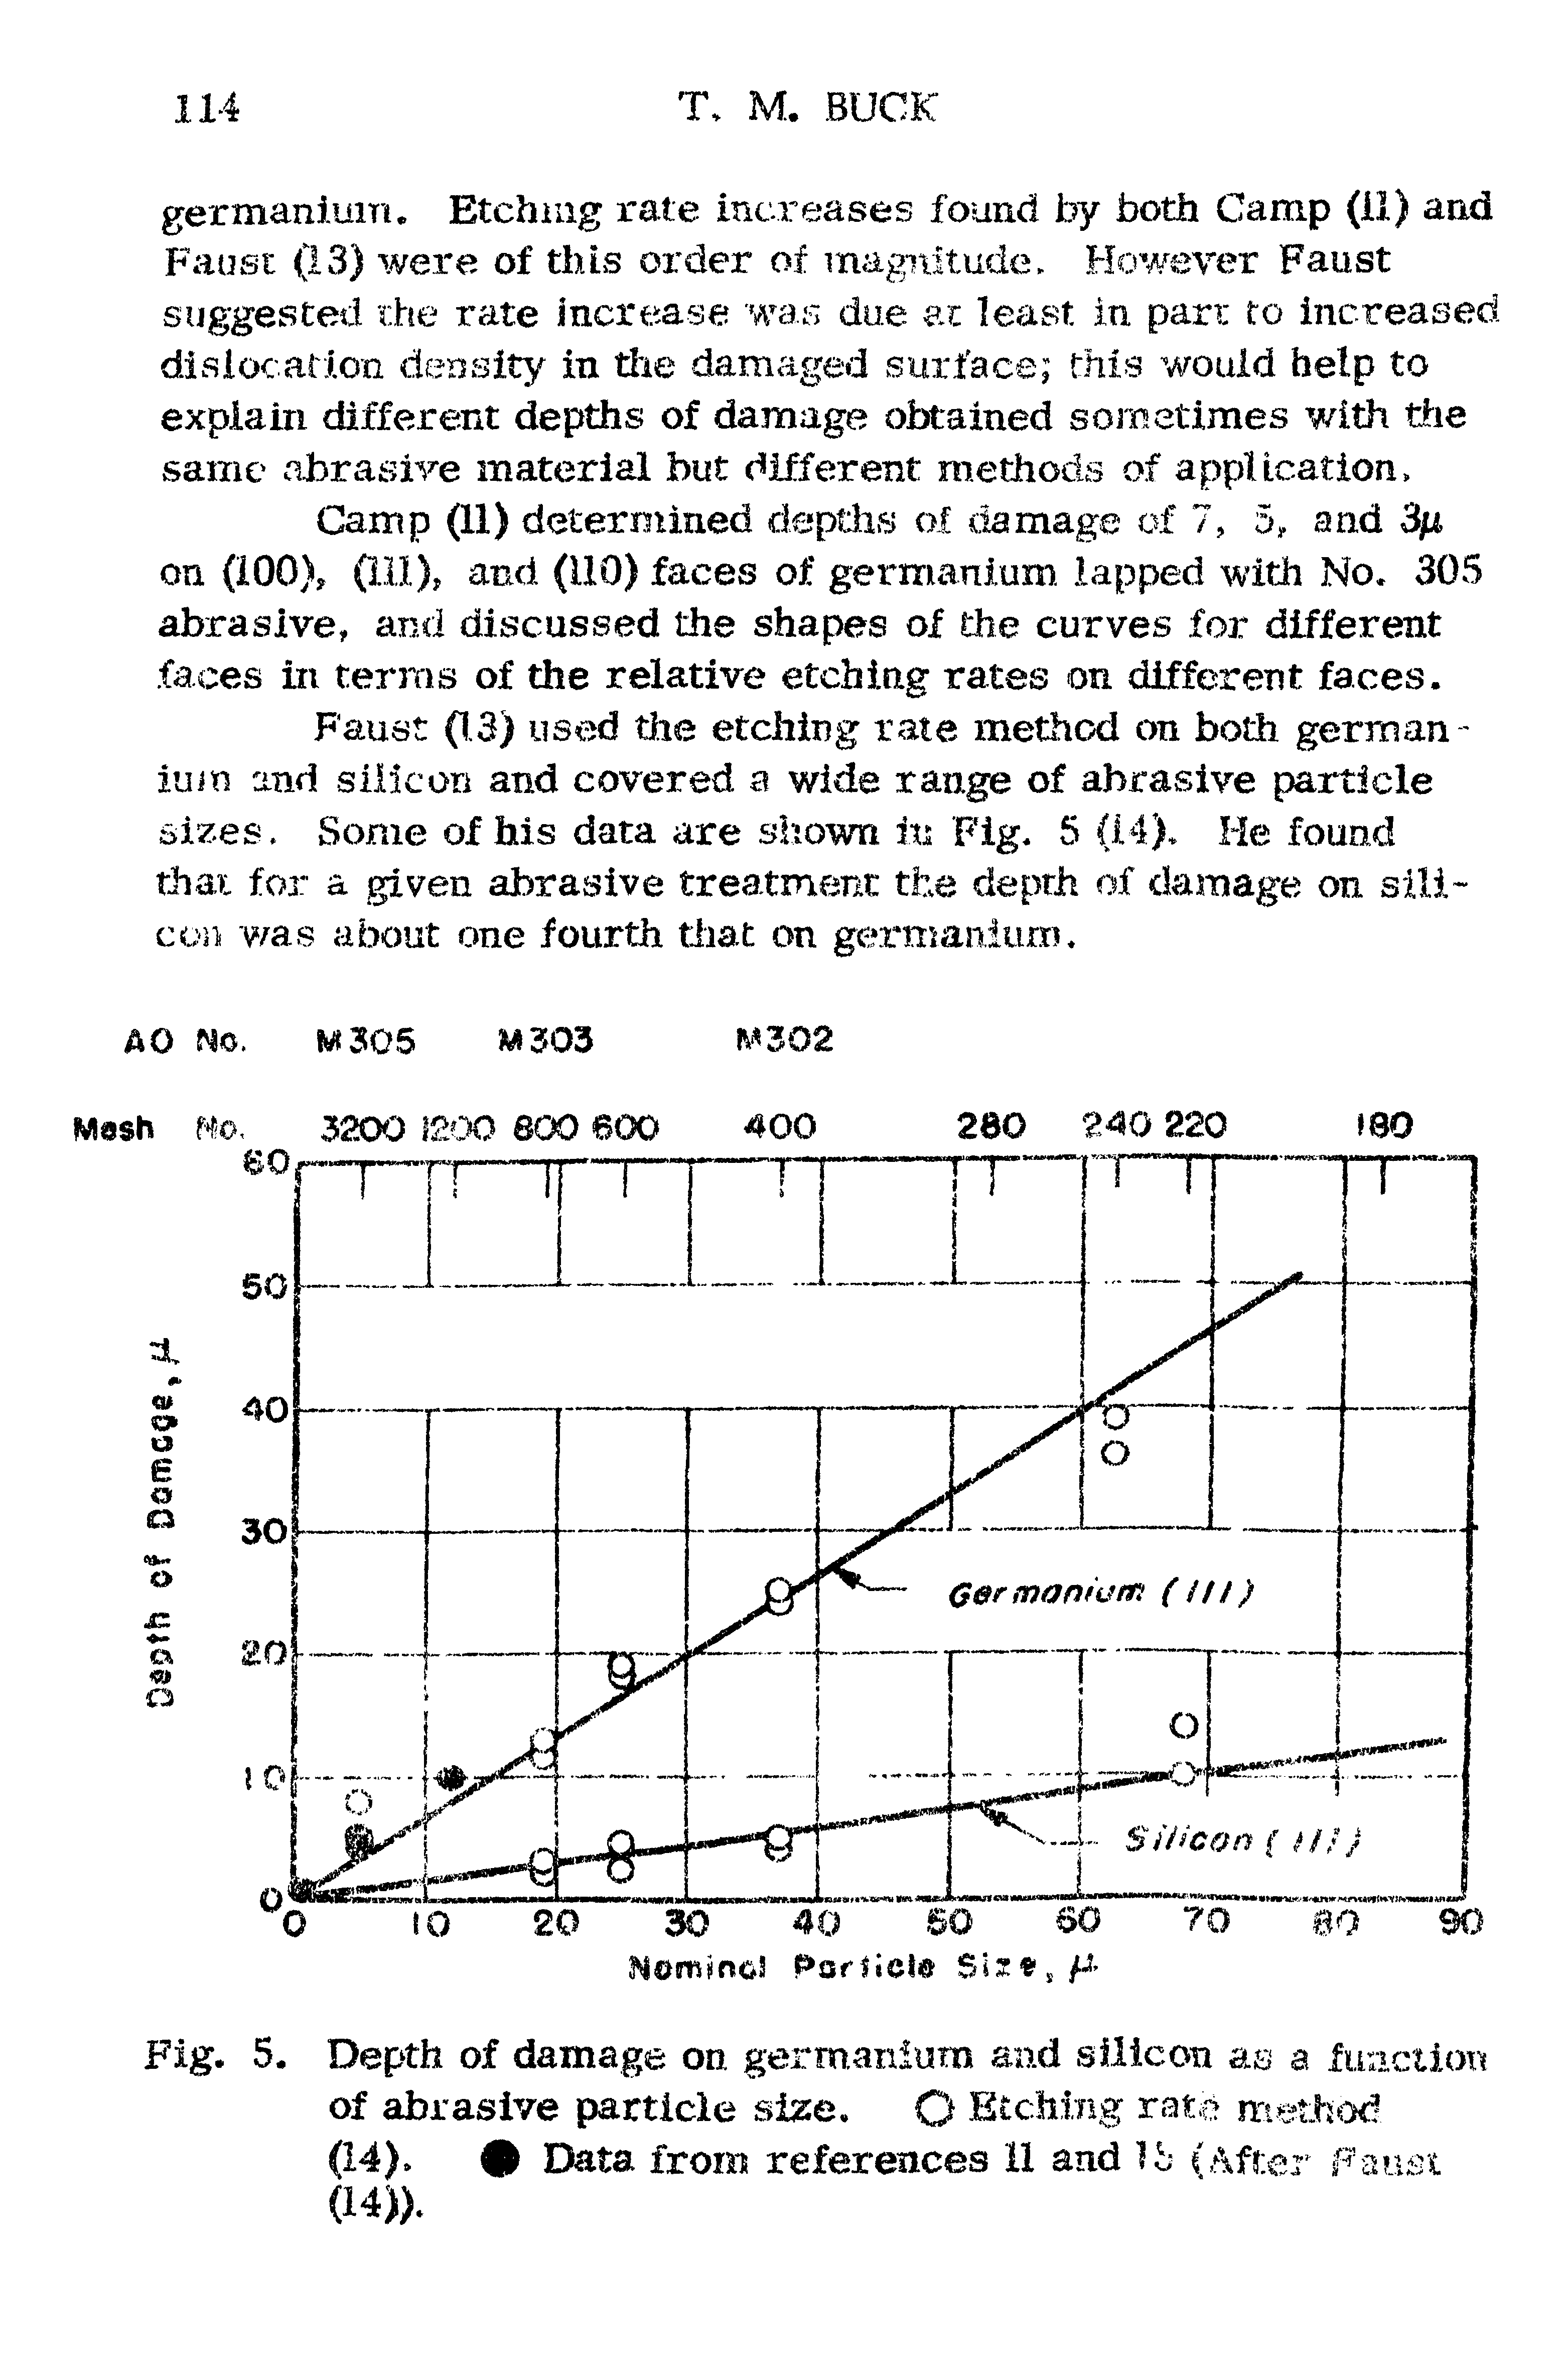 Fig. 5. Depth of damage on germanium and silicon as a function of abrasive particle size. O Etching rate method (14). Data from references 11 and lb After Faust...